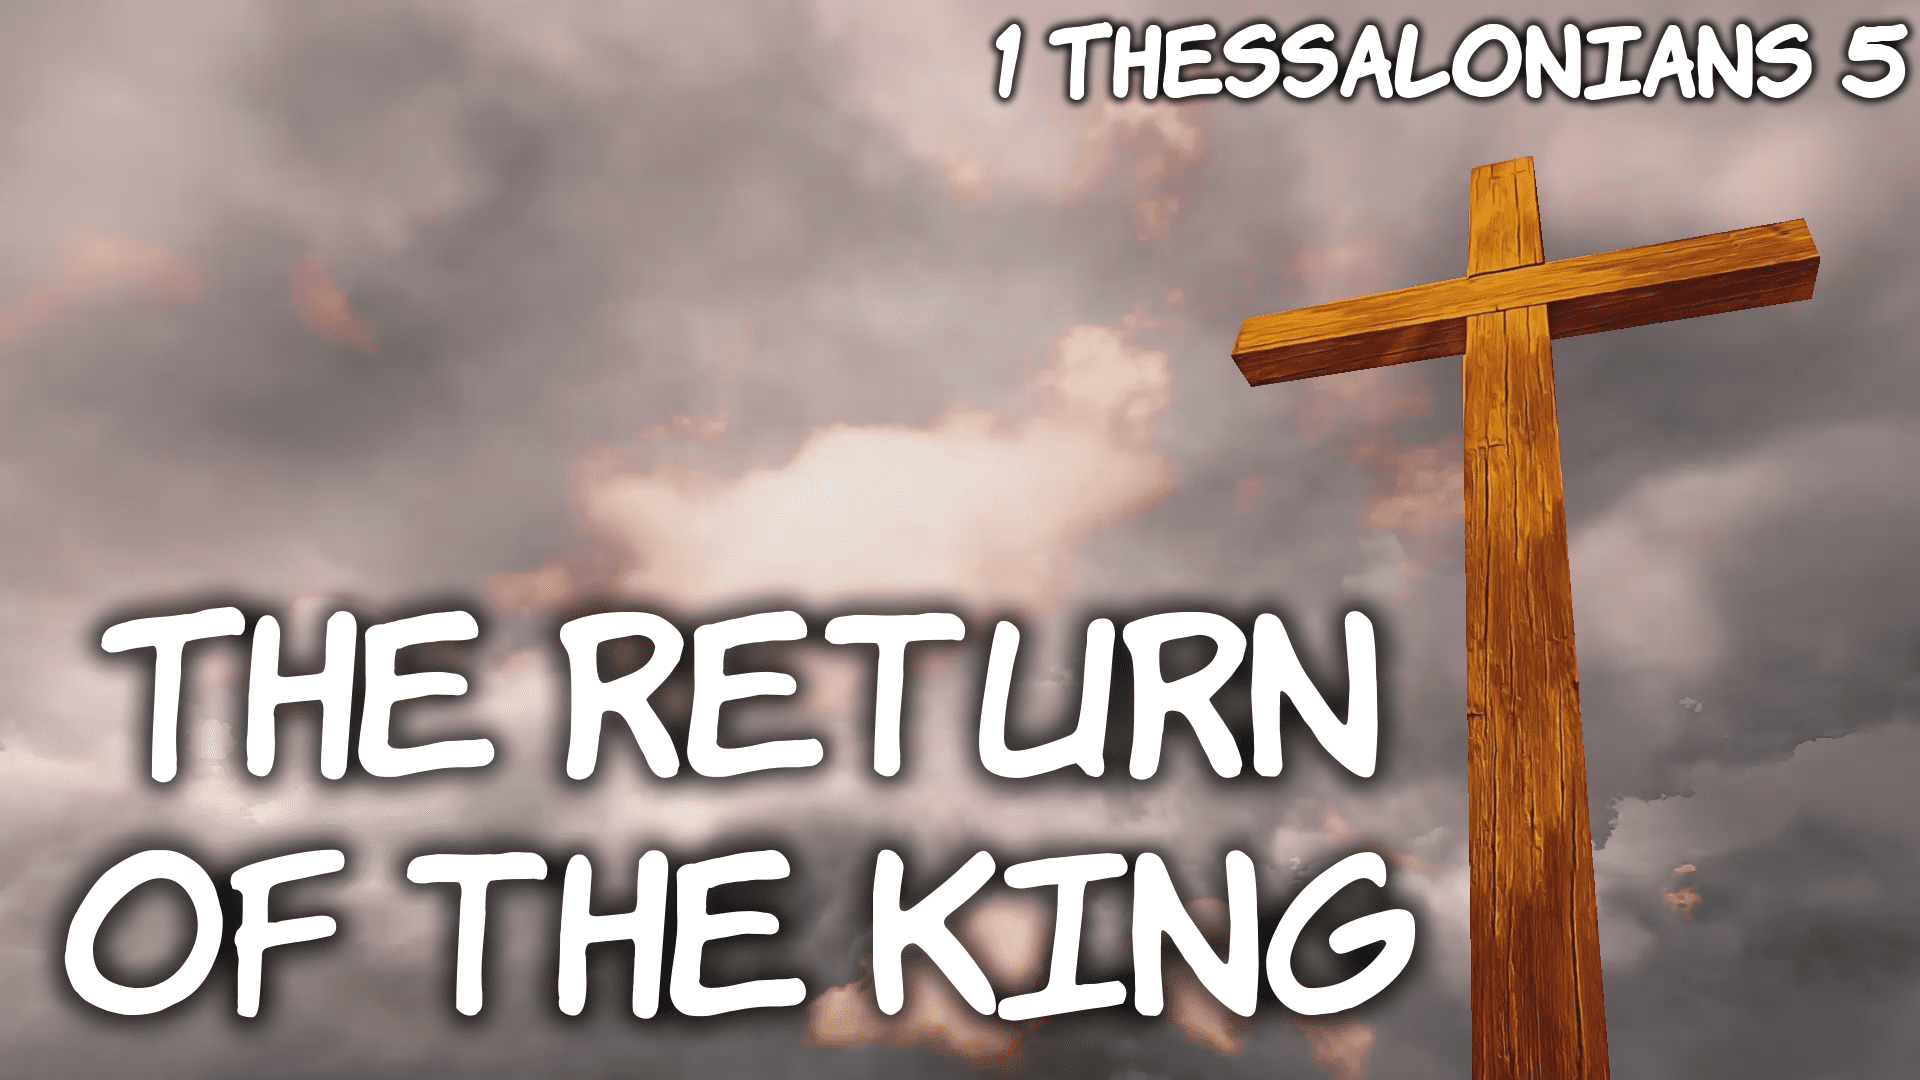 The Return Of the King